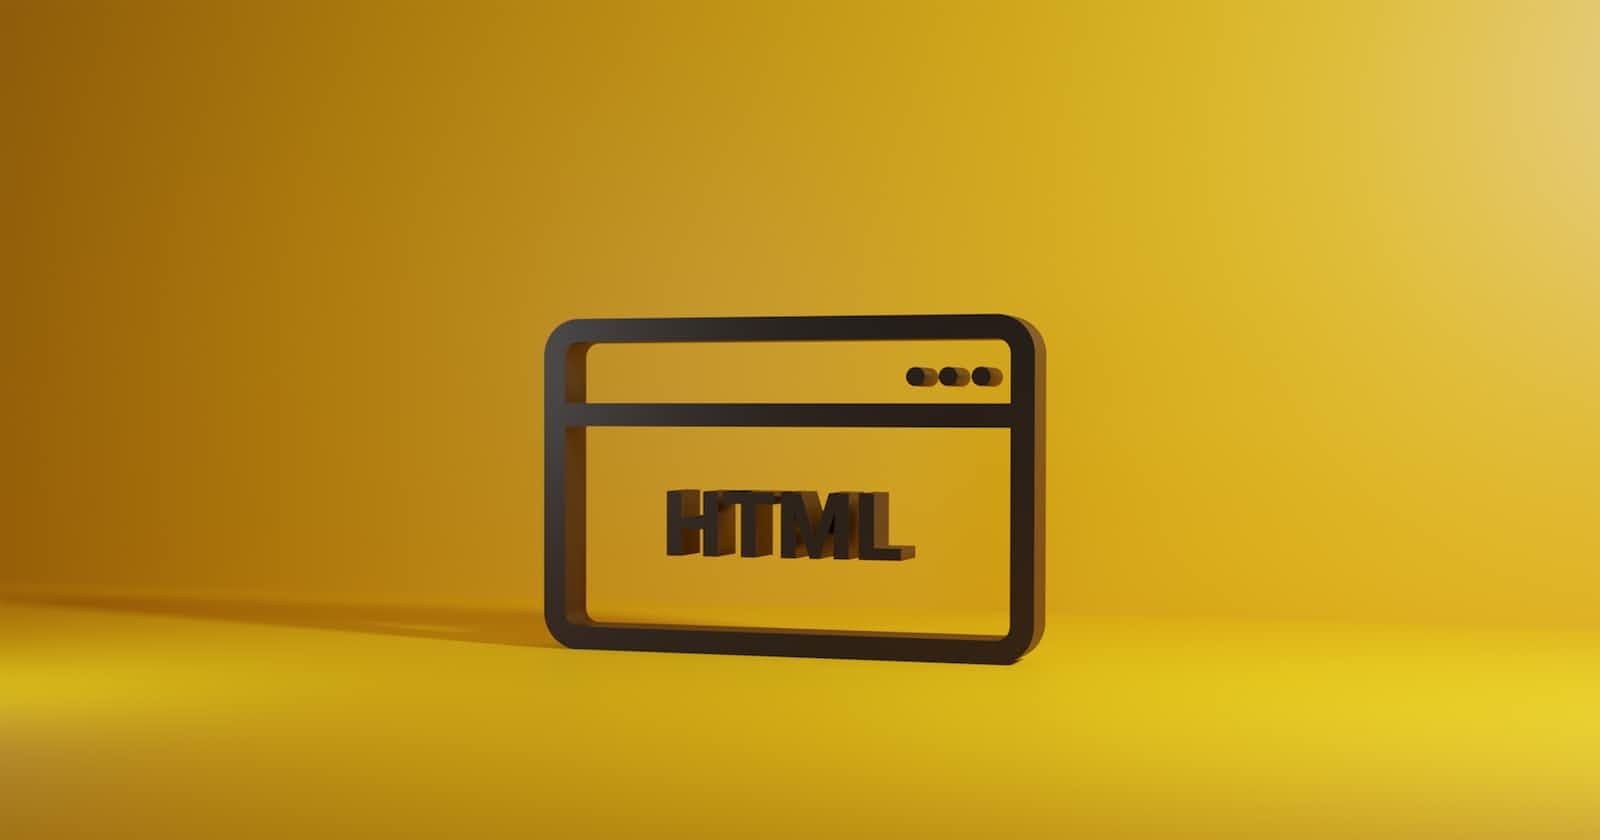 Welcome to HTML